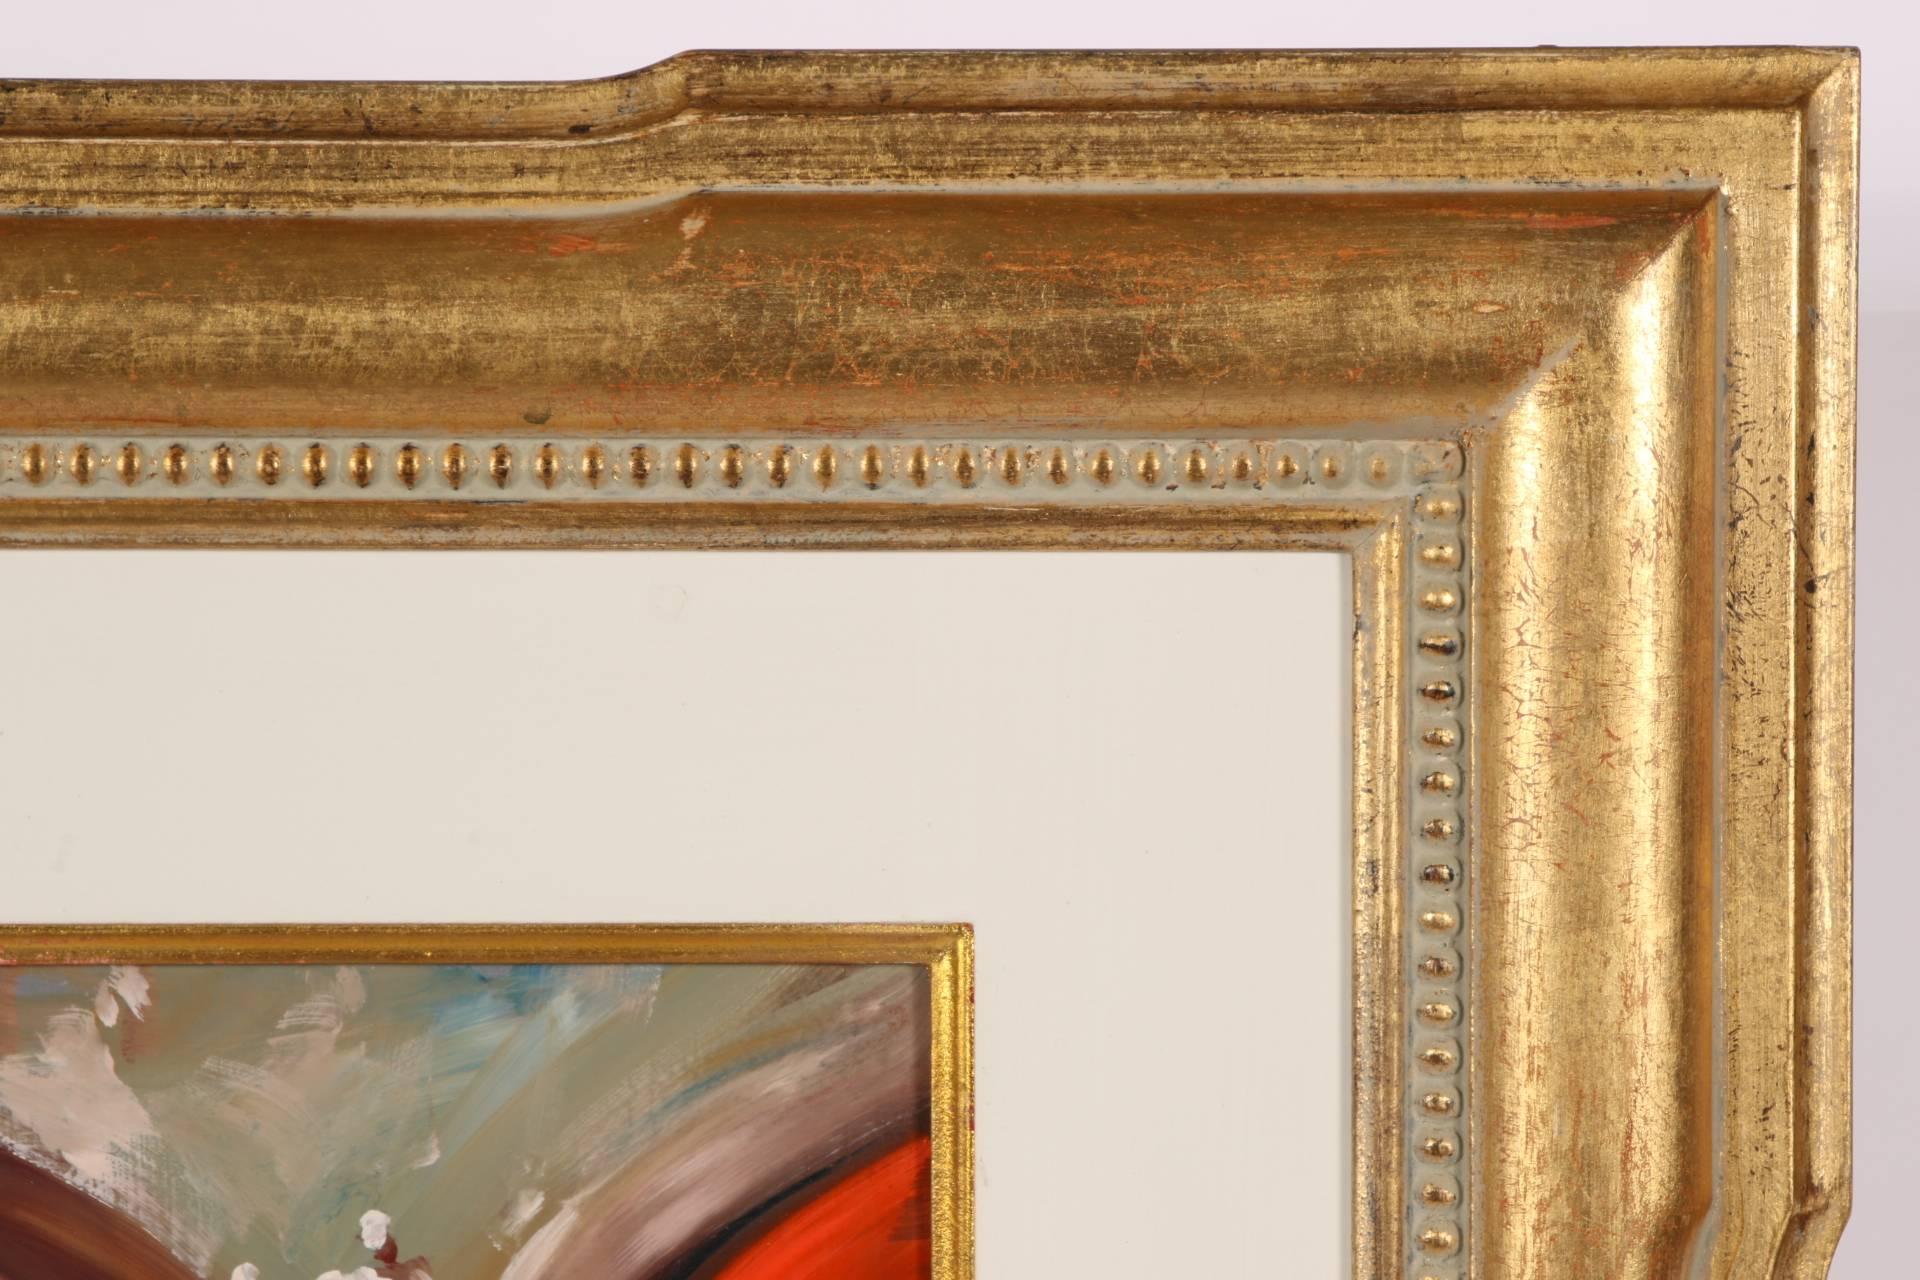 A dramatic and colorful Oil on Board in a custom Gilt wood frame. Figures on a monumental staircase. Signed lower right, labelled and dedicated on verso. In a fine gilt frame.
Panel measures 19.5